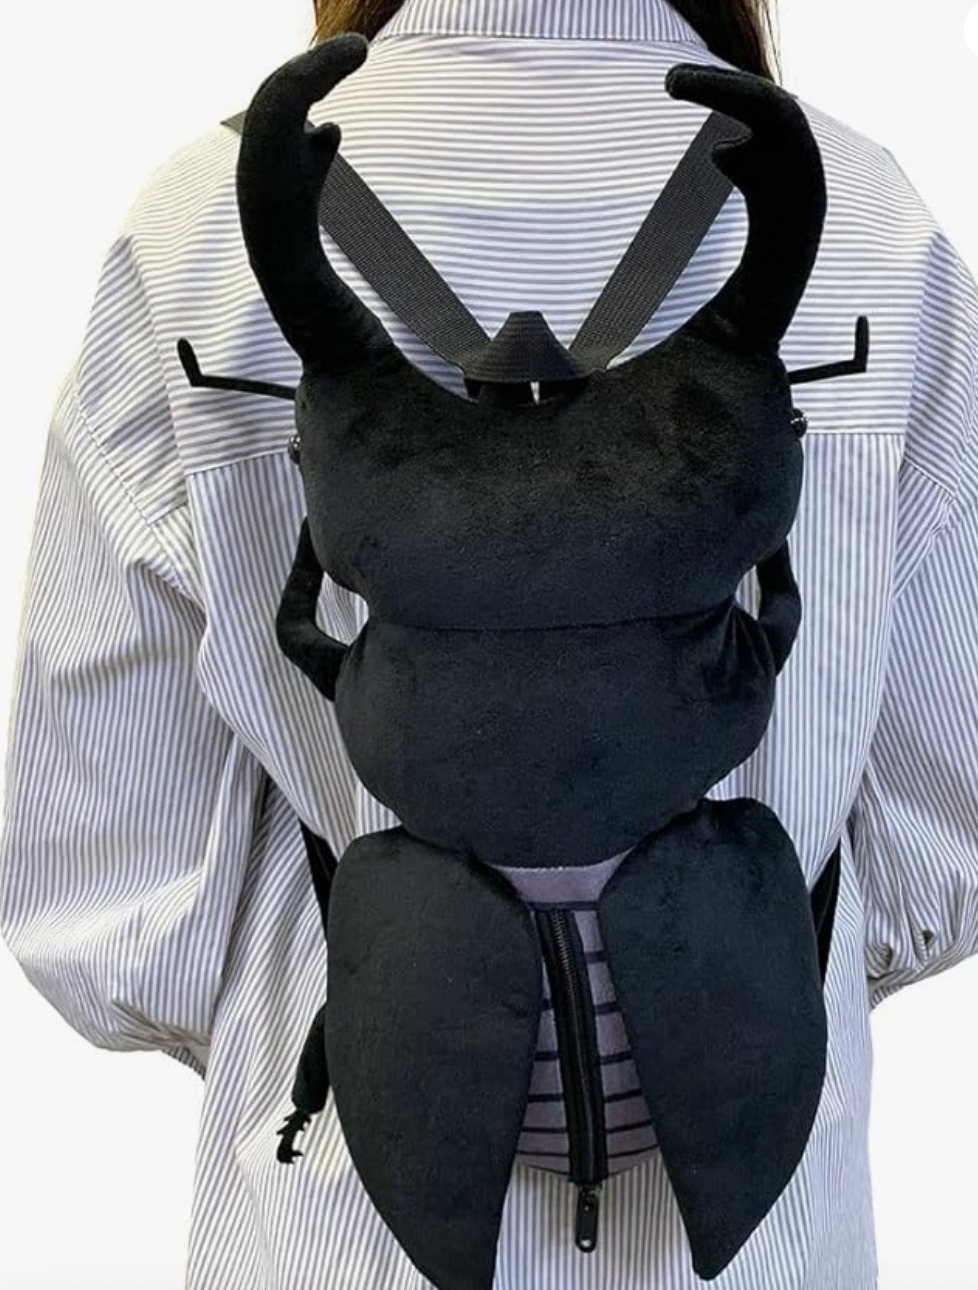 Insect backpack giant stag beetle stuffed plush 55cm Japan